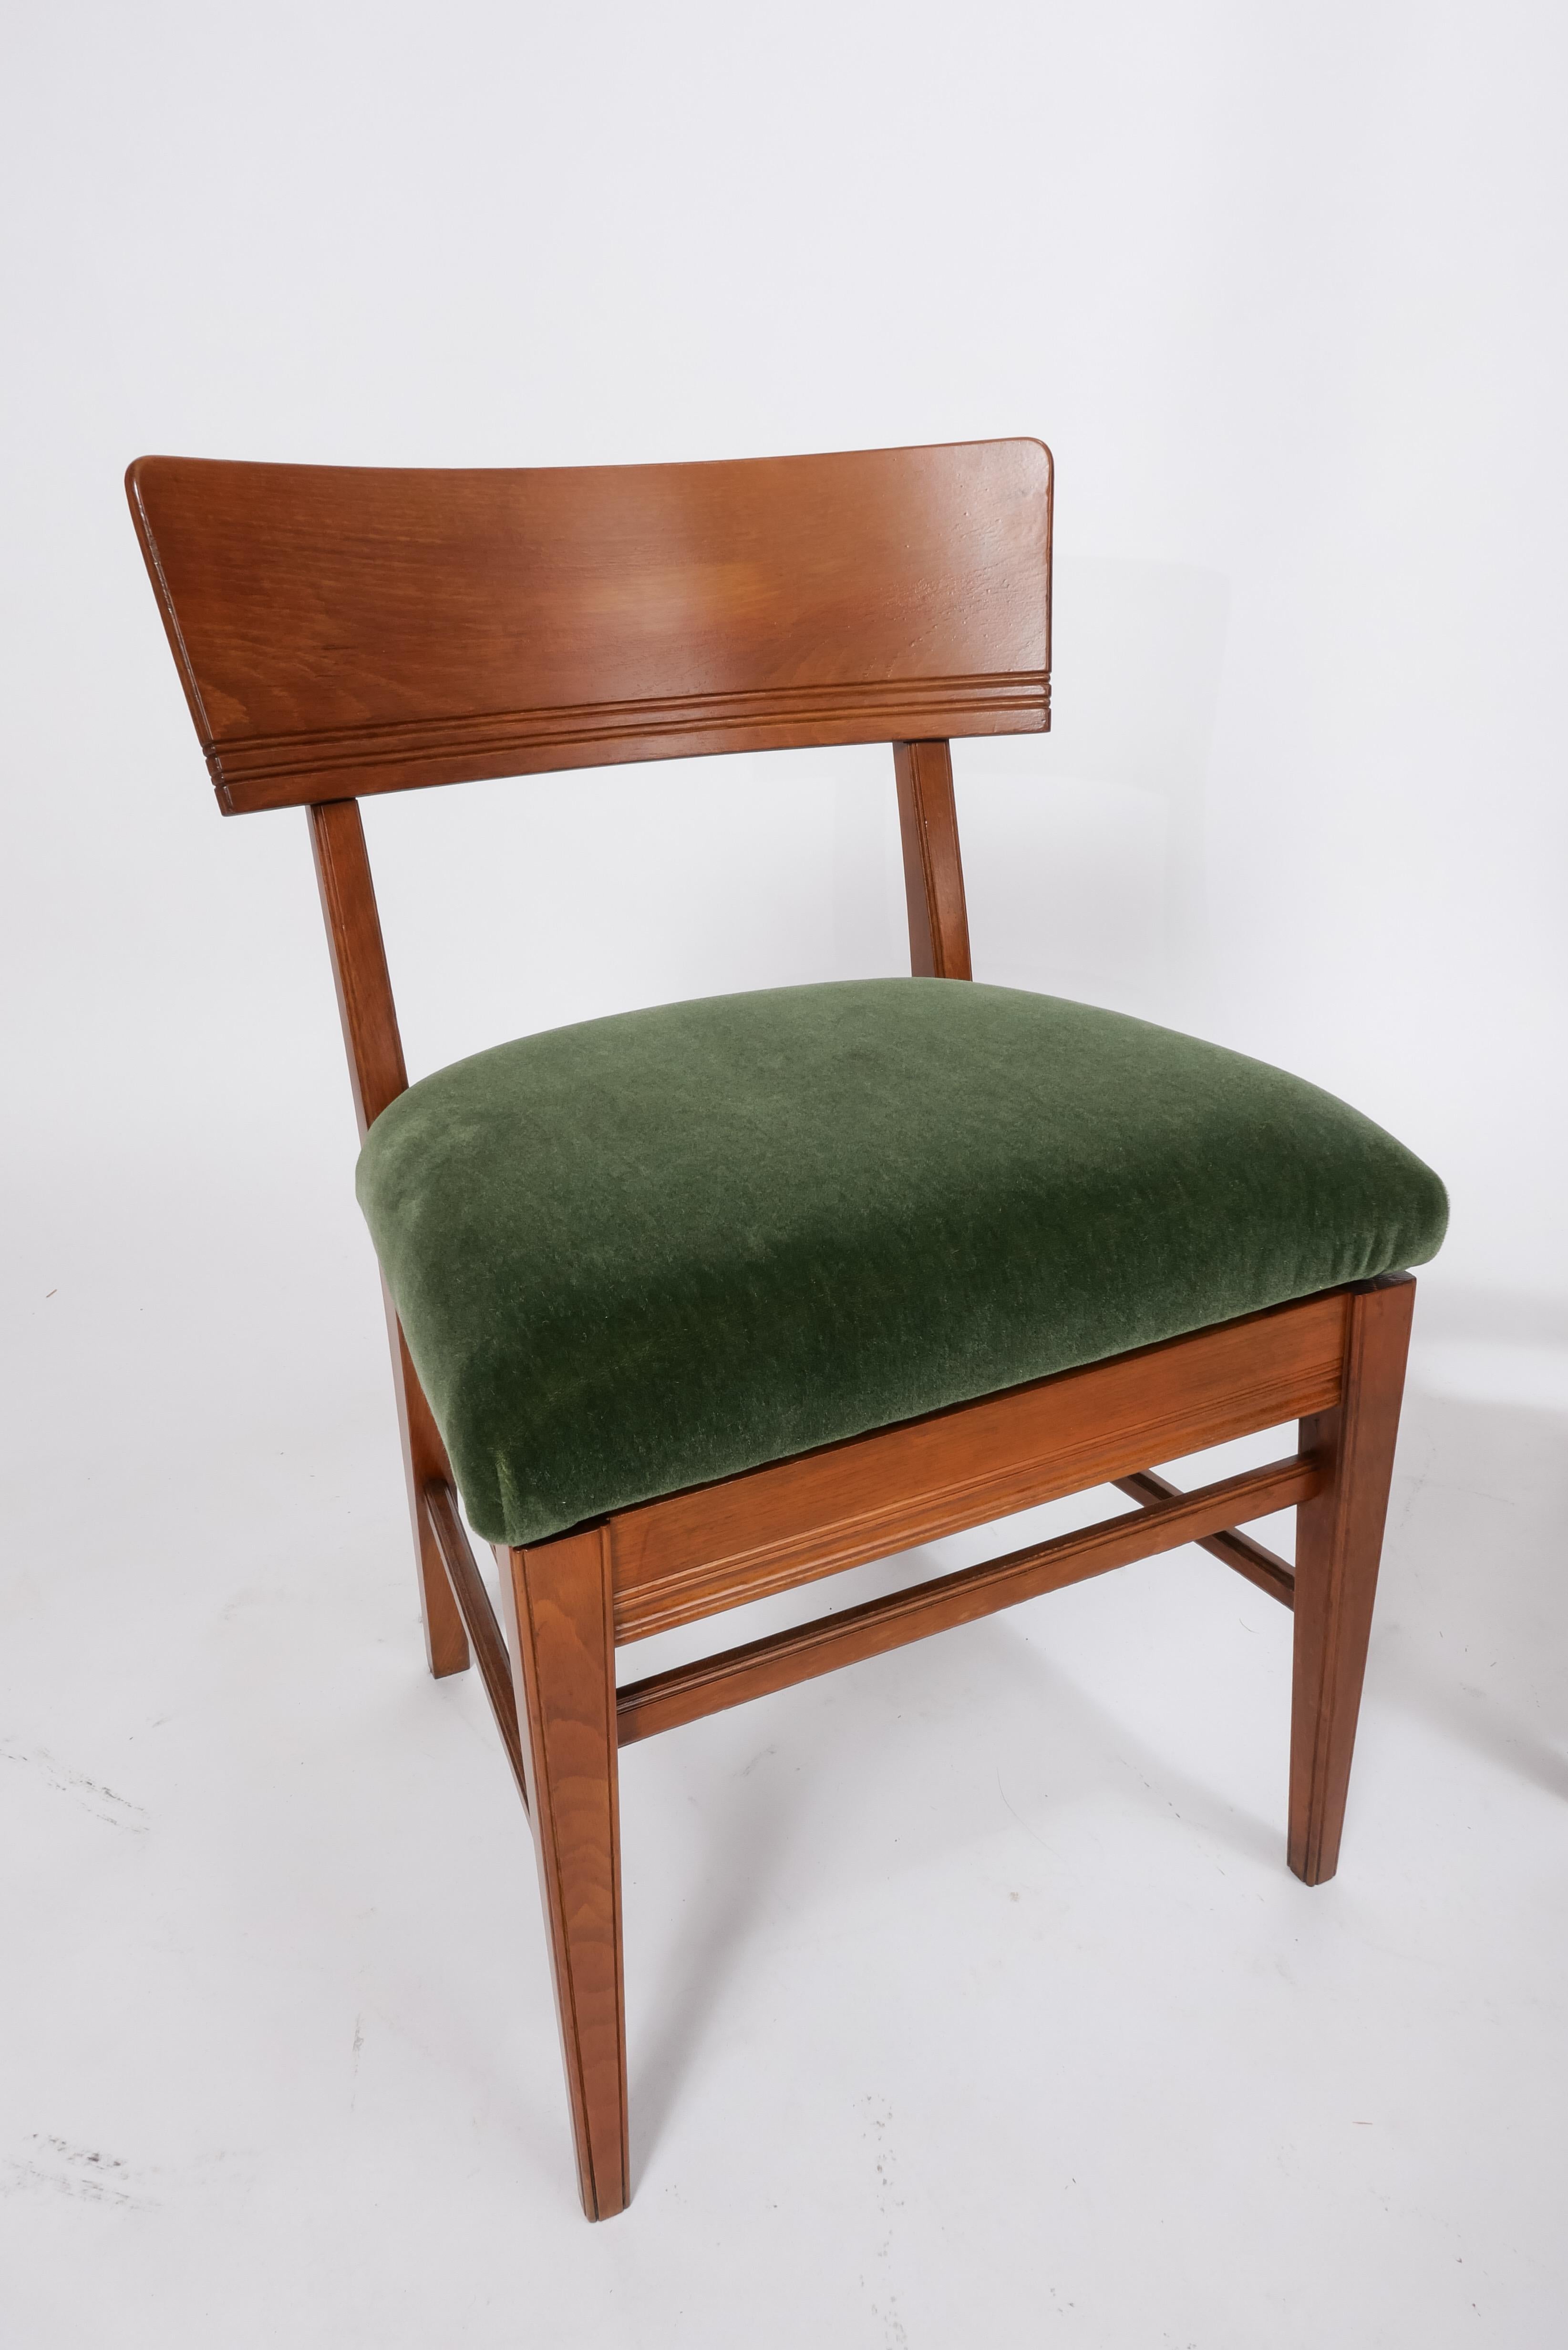 Architect Martin Nyrop designed these chairs for Copenhagen Town Hall in 1905. They are an important example of the Danish Arts and Crafts movement in design. The pair have been restored and freshly reupholstered in luscious moss green mohair from